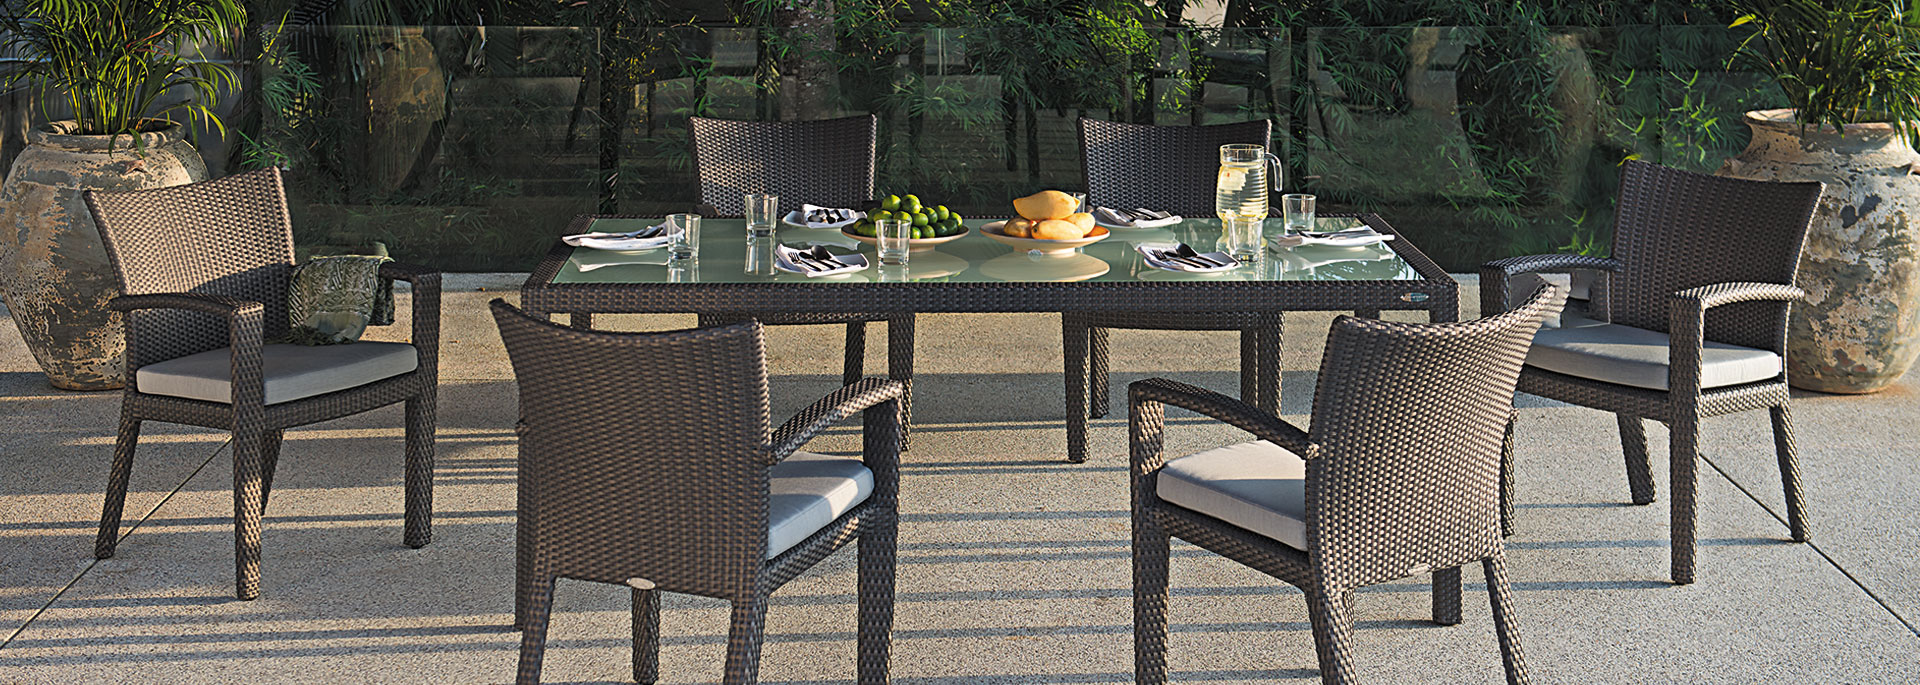 OHMM OUTDOOR FURNITURE @ OUTDOOR DINING SETS